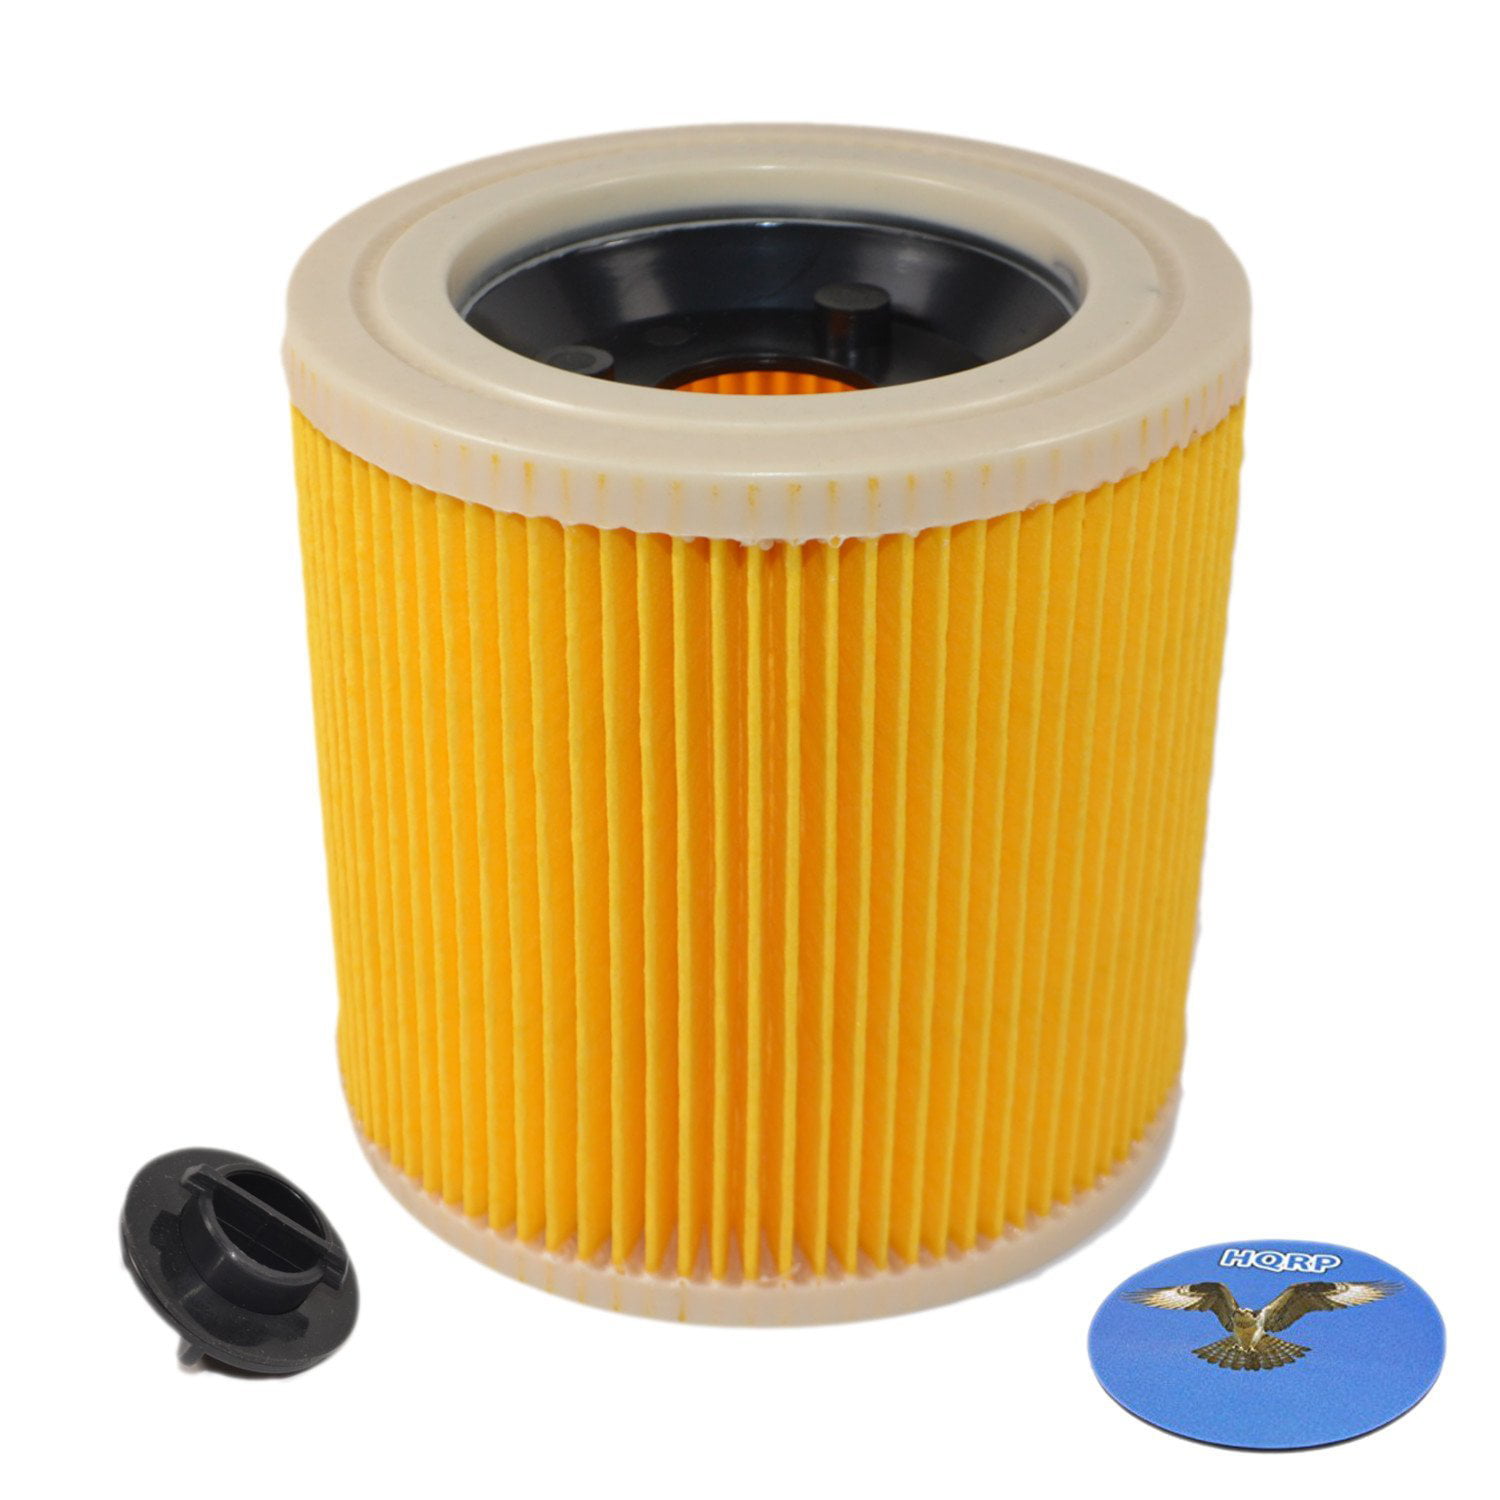 S109 35601063 Replacement HQRP Pre-Motor HEPA Filter for Hoover Upright Vacuums 